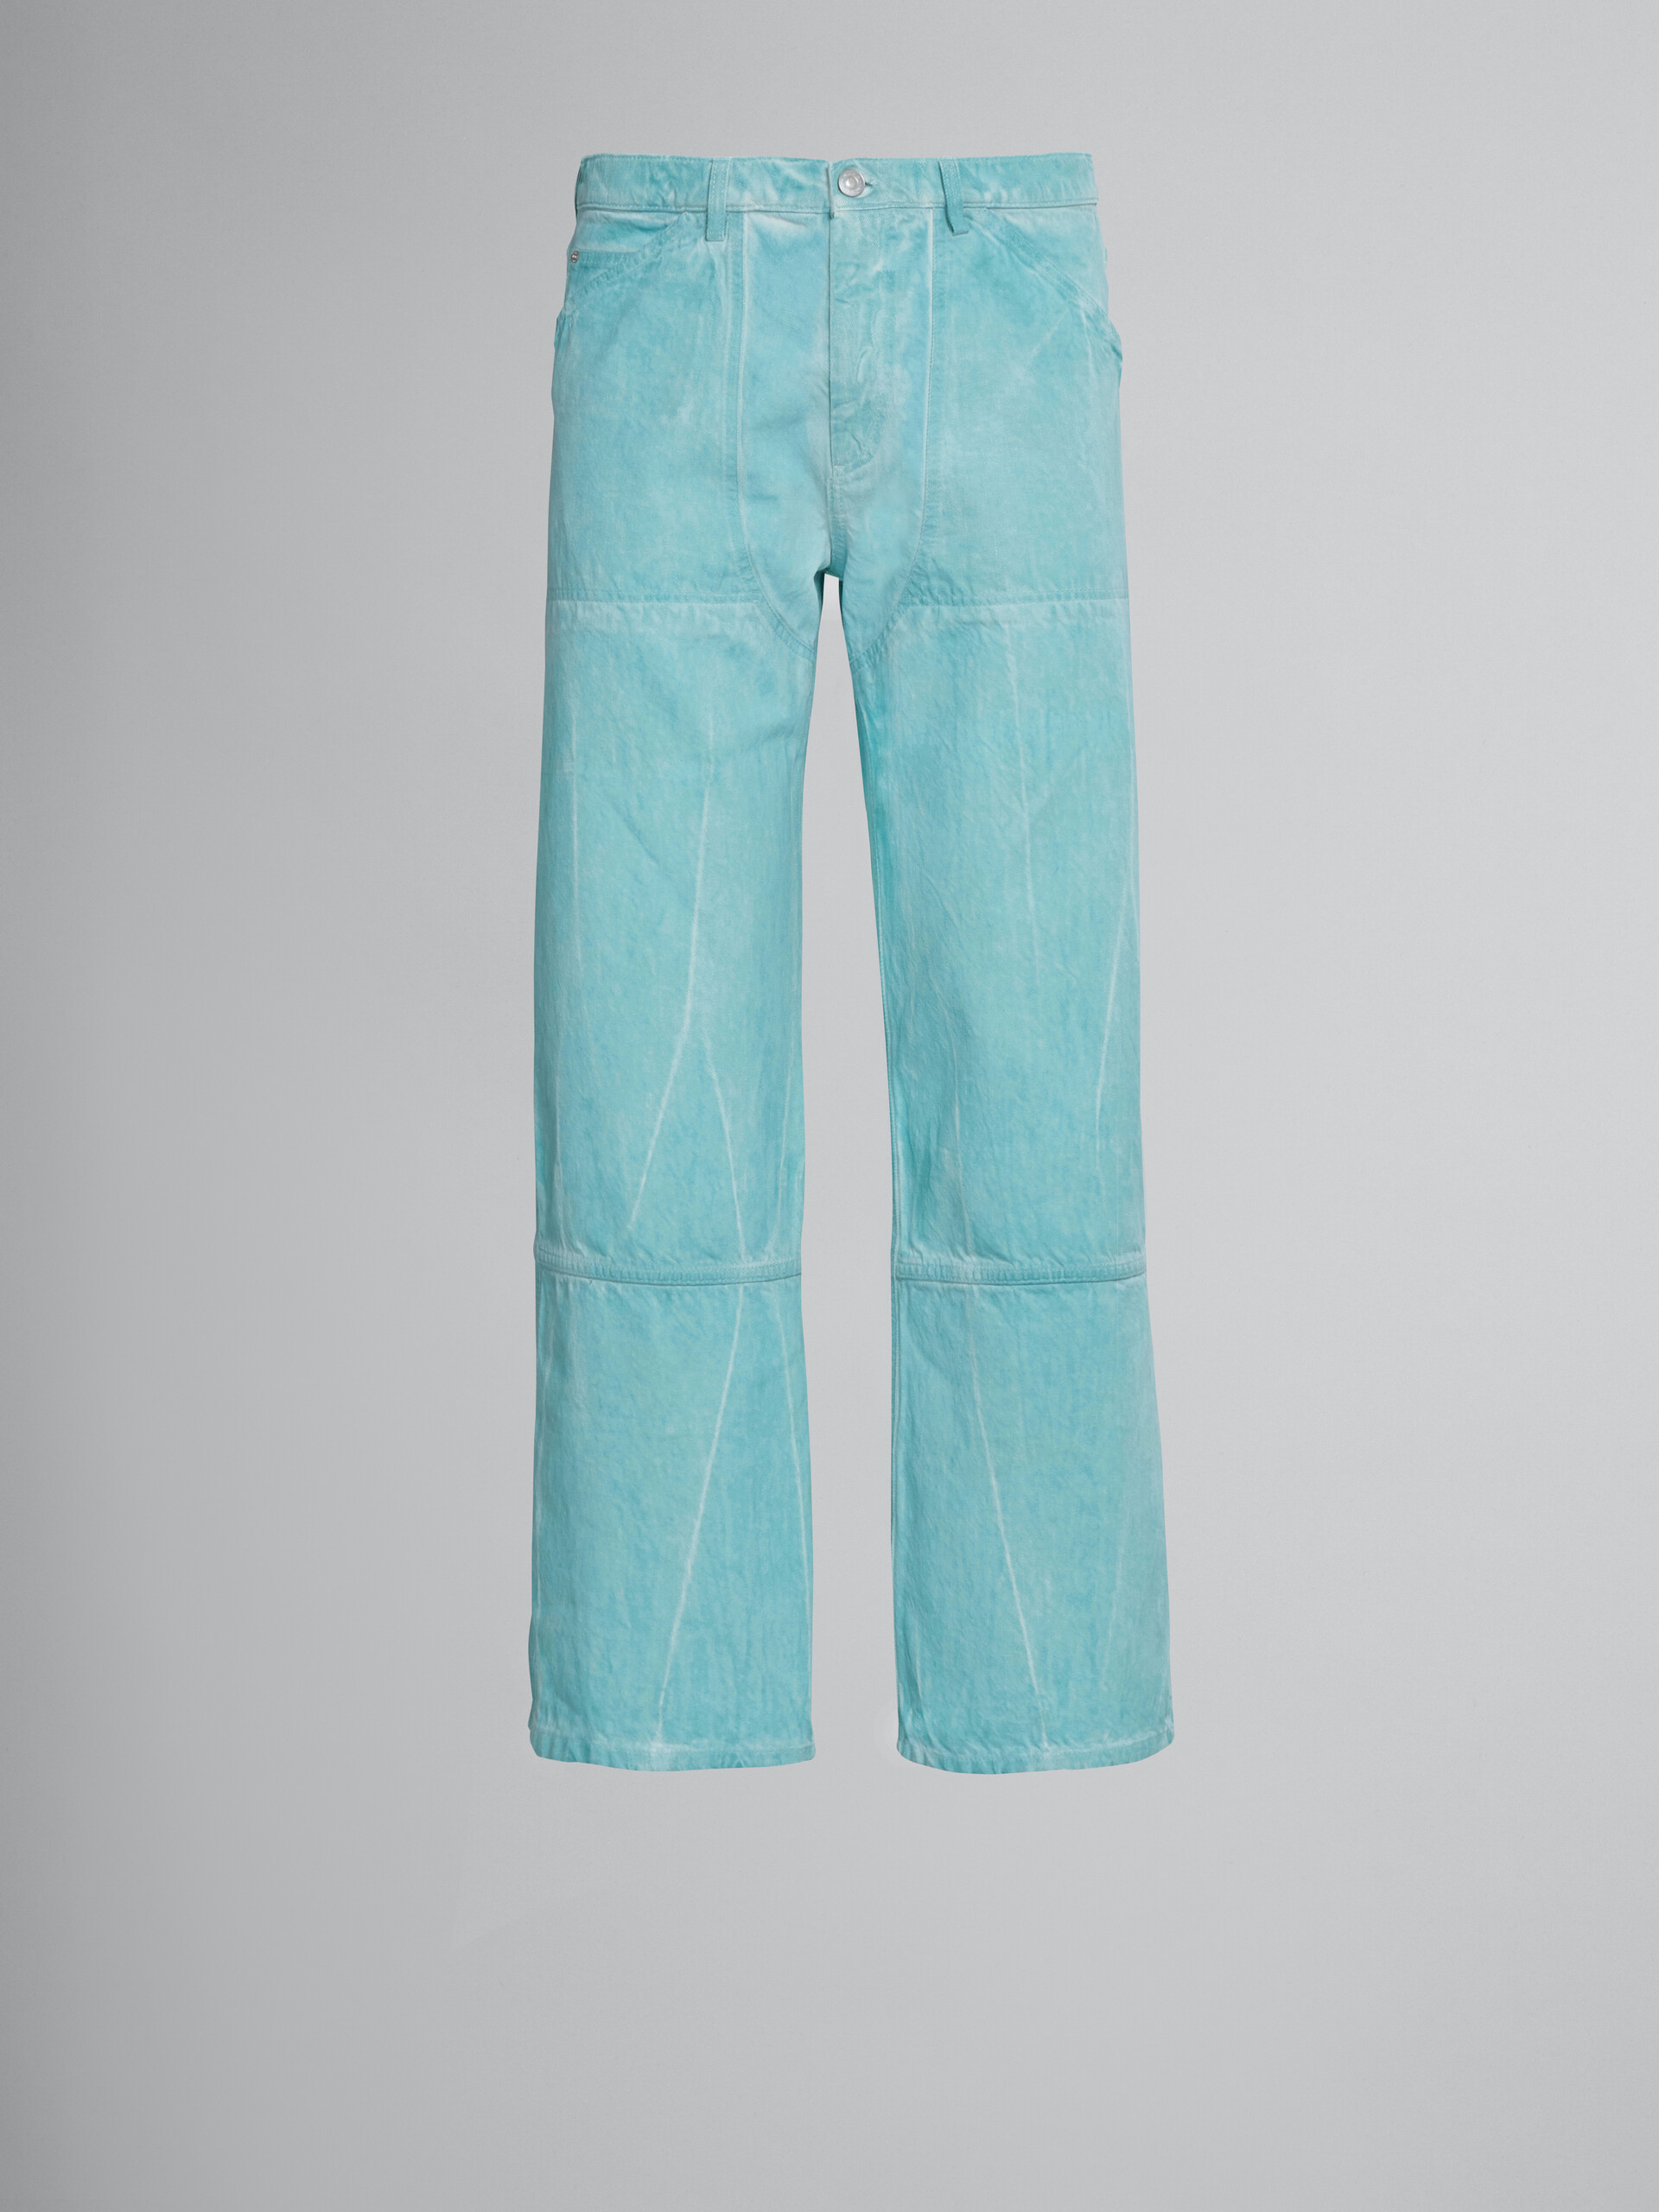 Loose trousers in turquoise cotton drill - Pants - Image 1